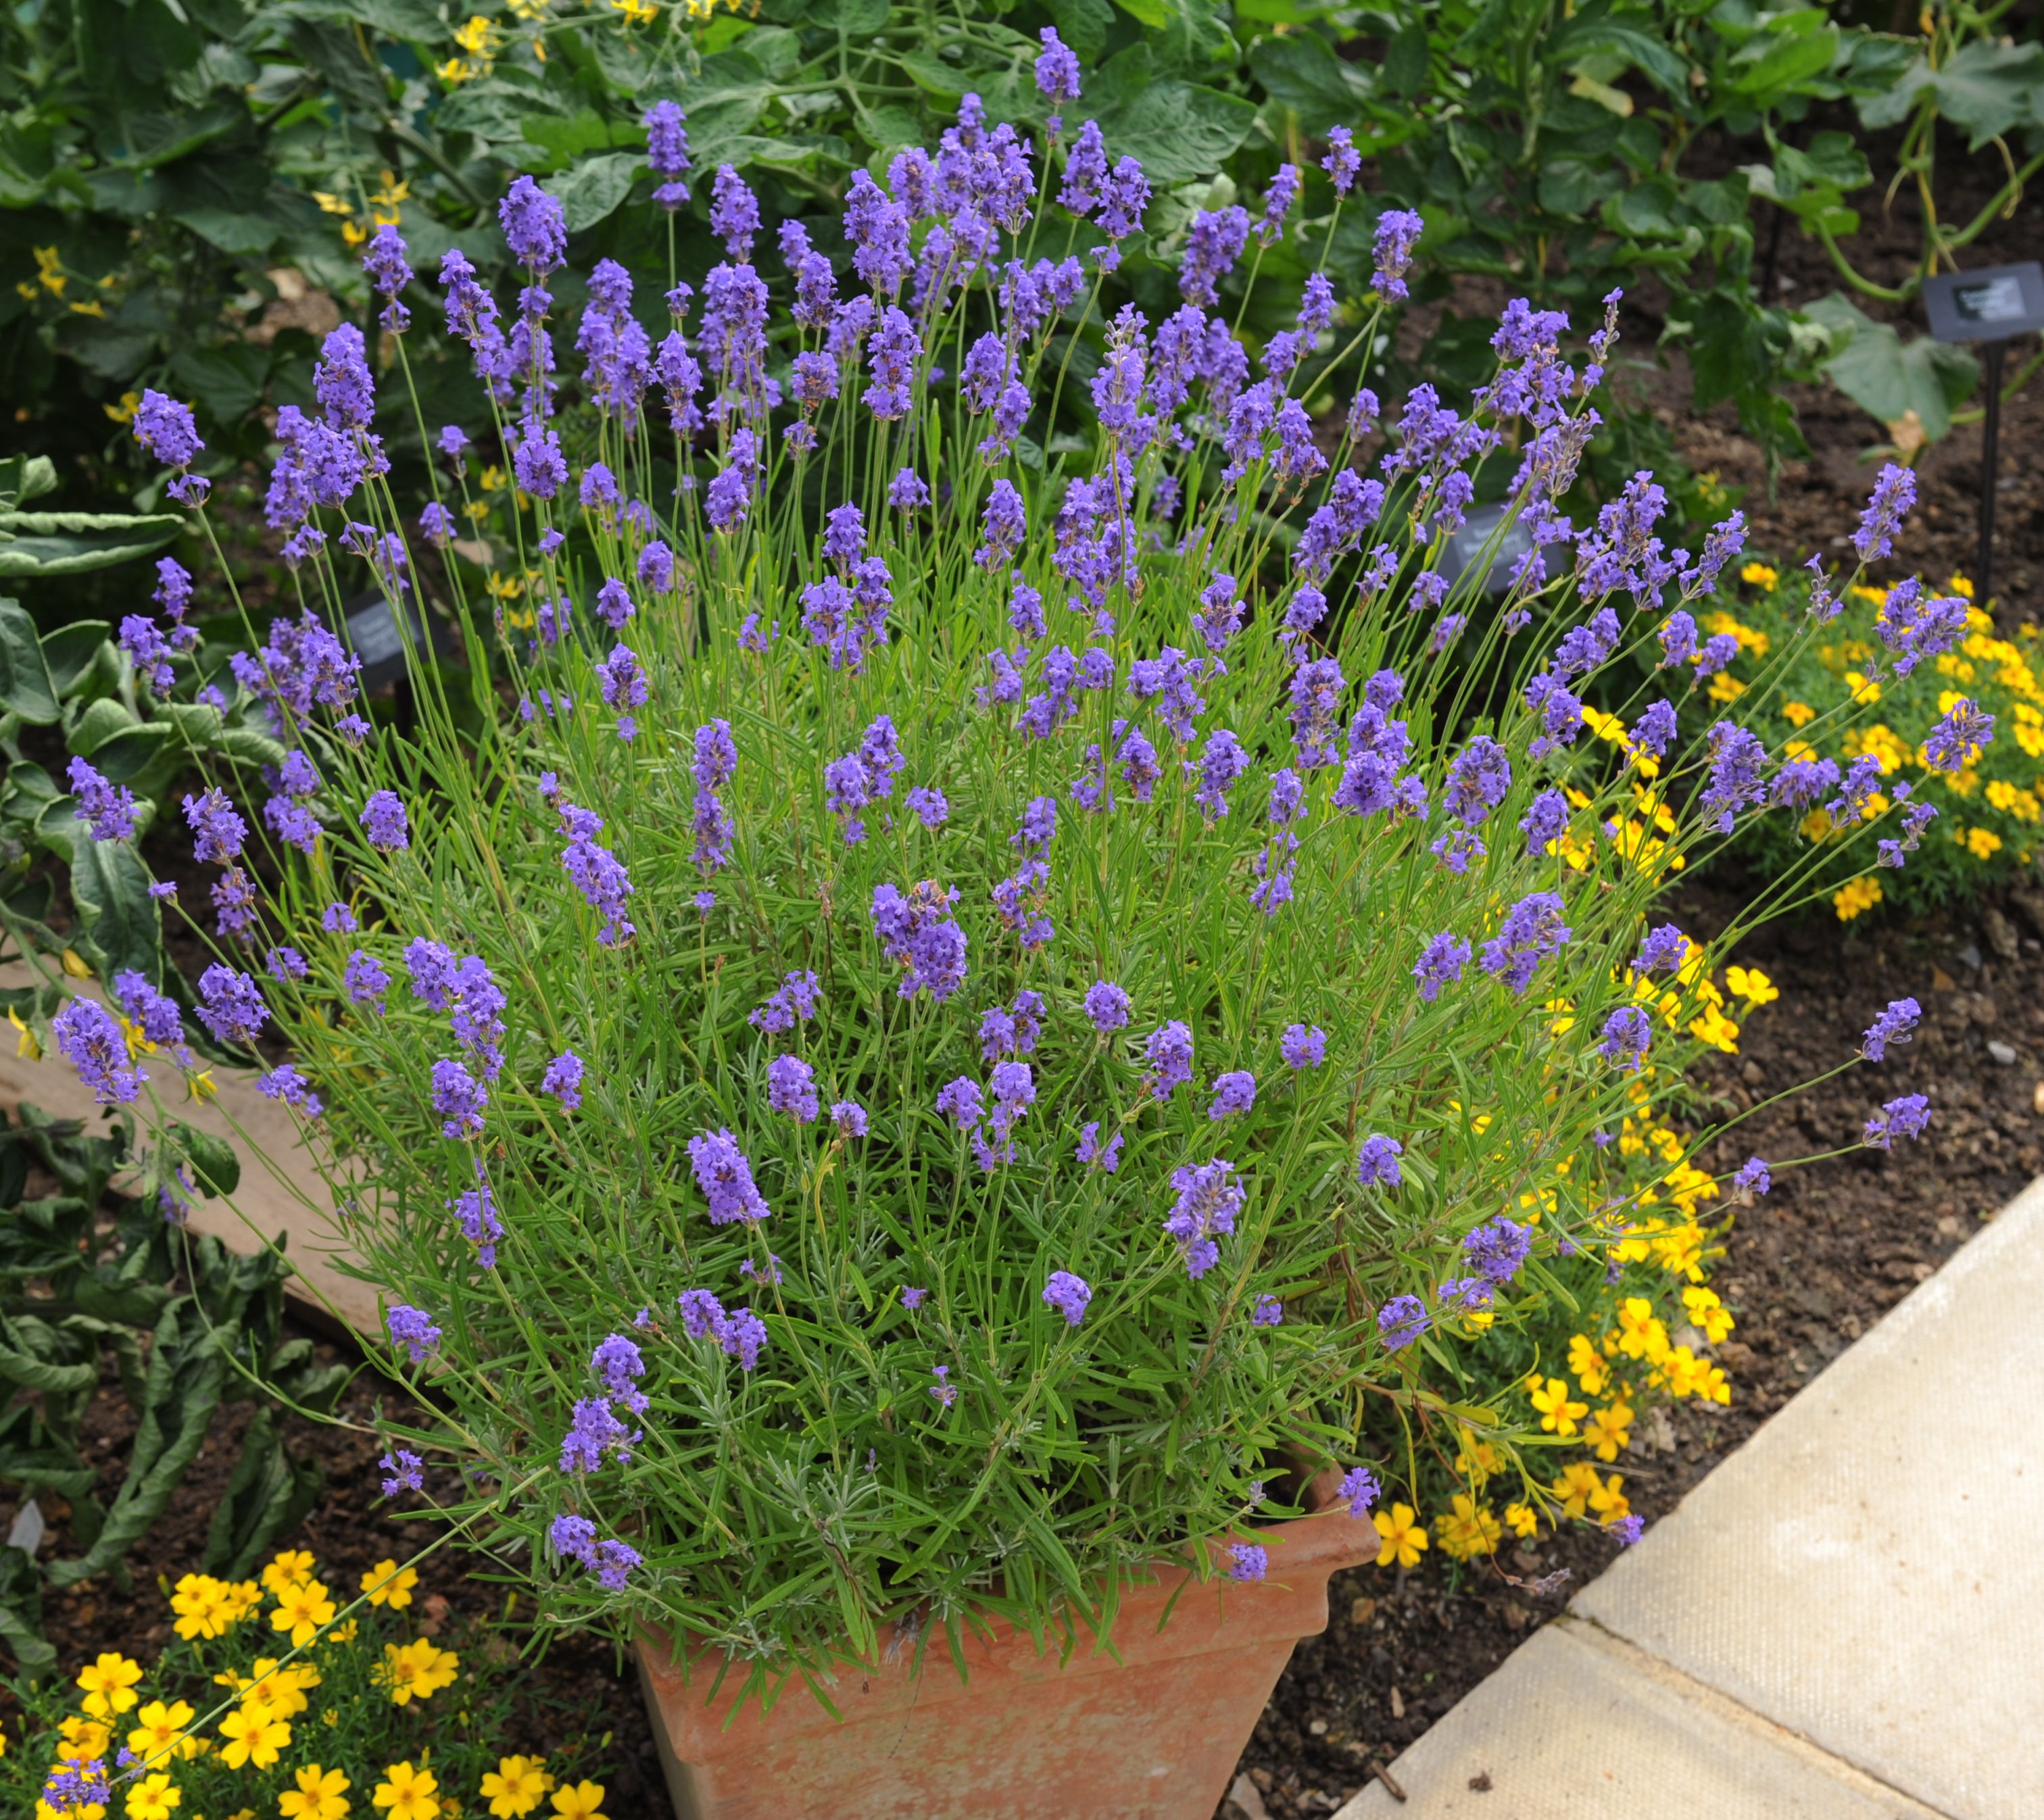 Potted Lavender Care - How To Grow Lavender In Containers